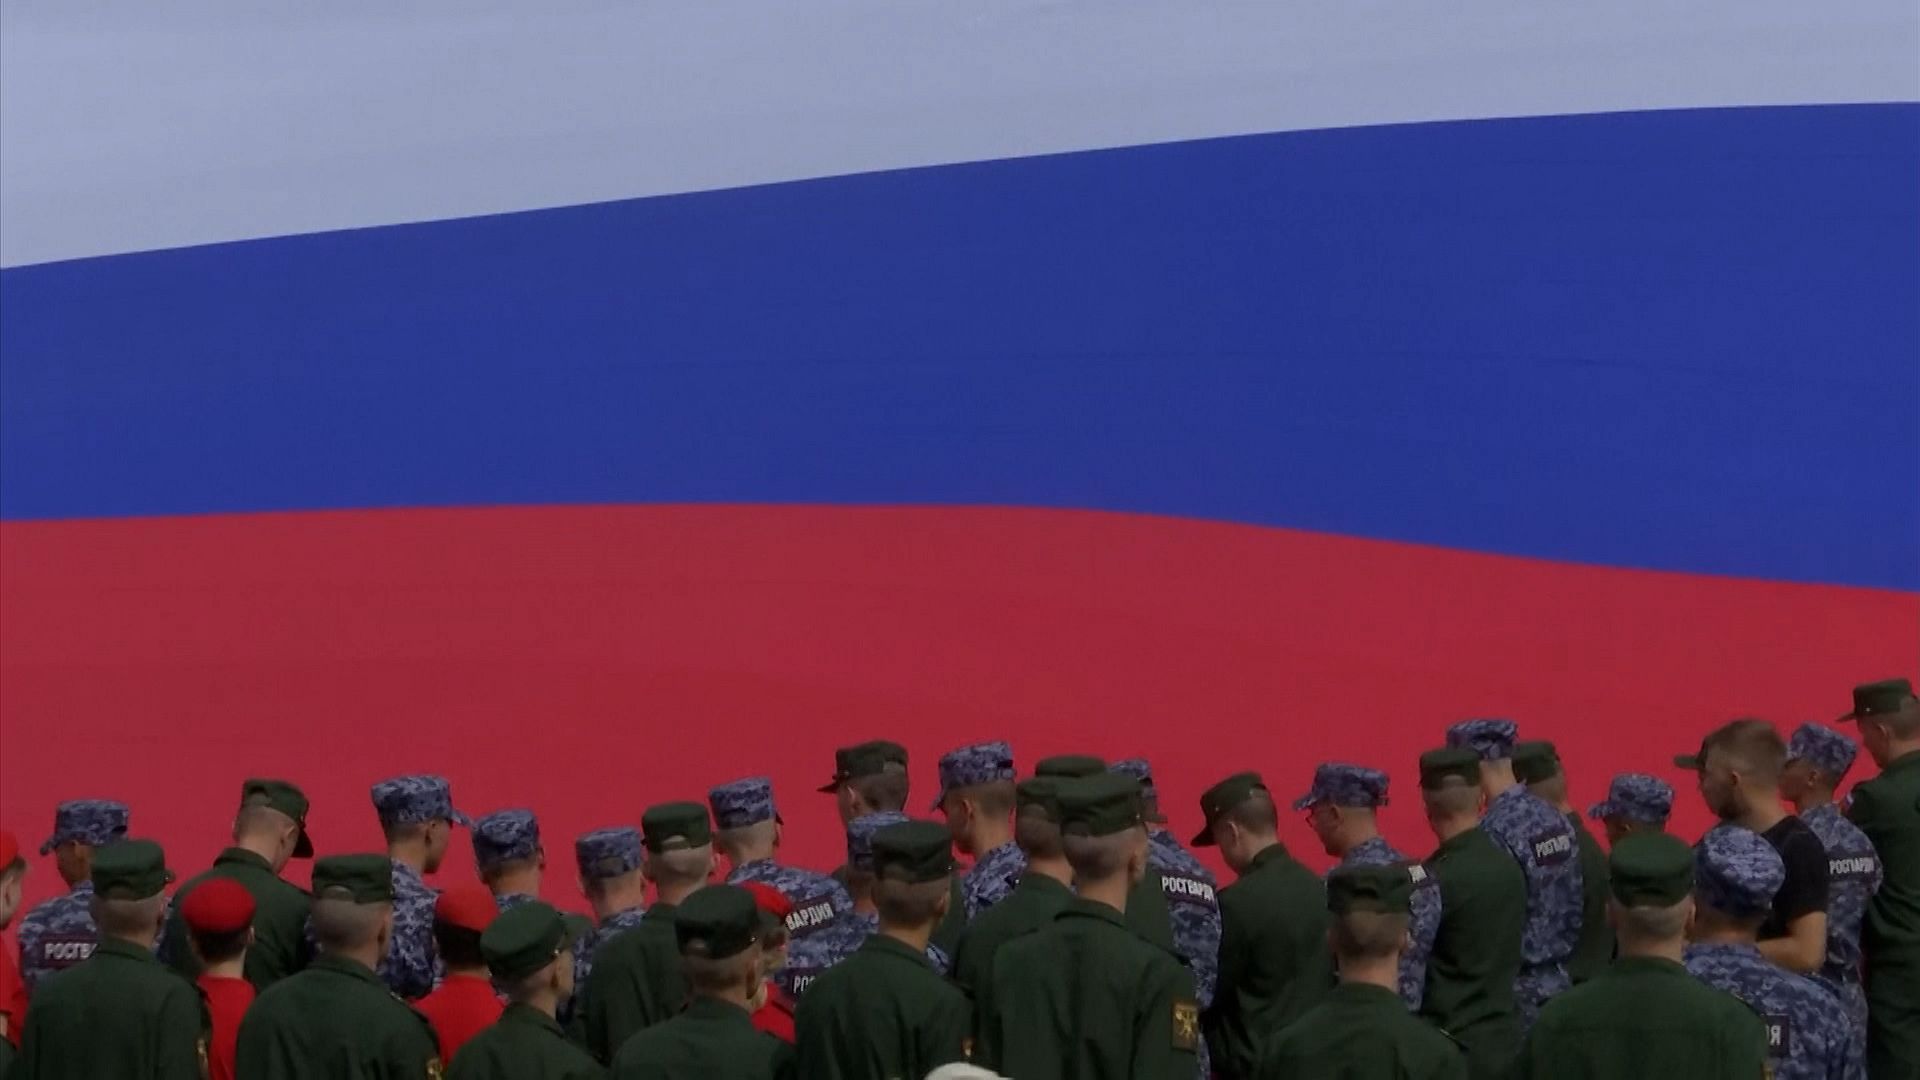 Video address on National Flag Day • President of Russia